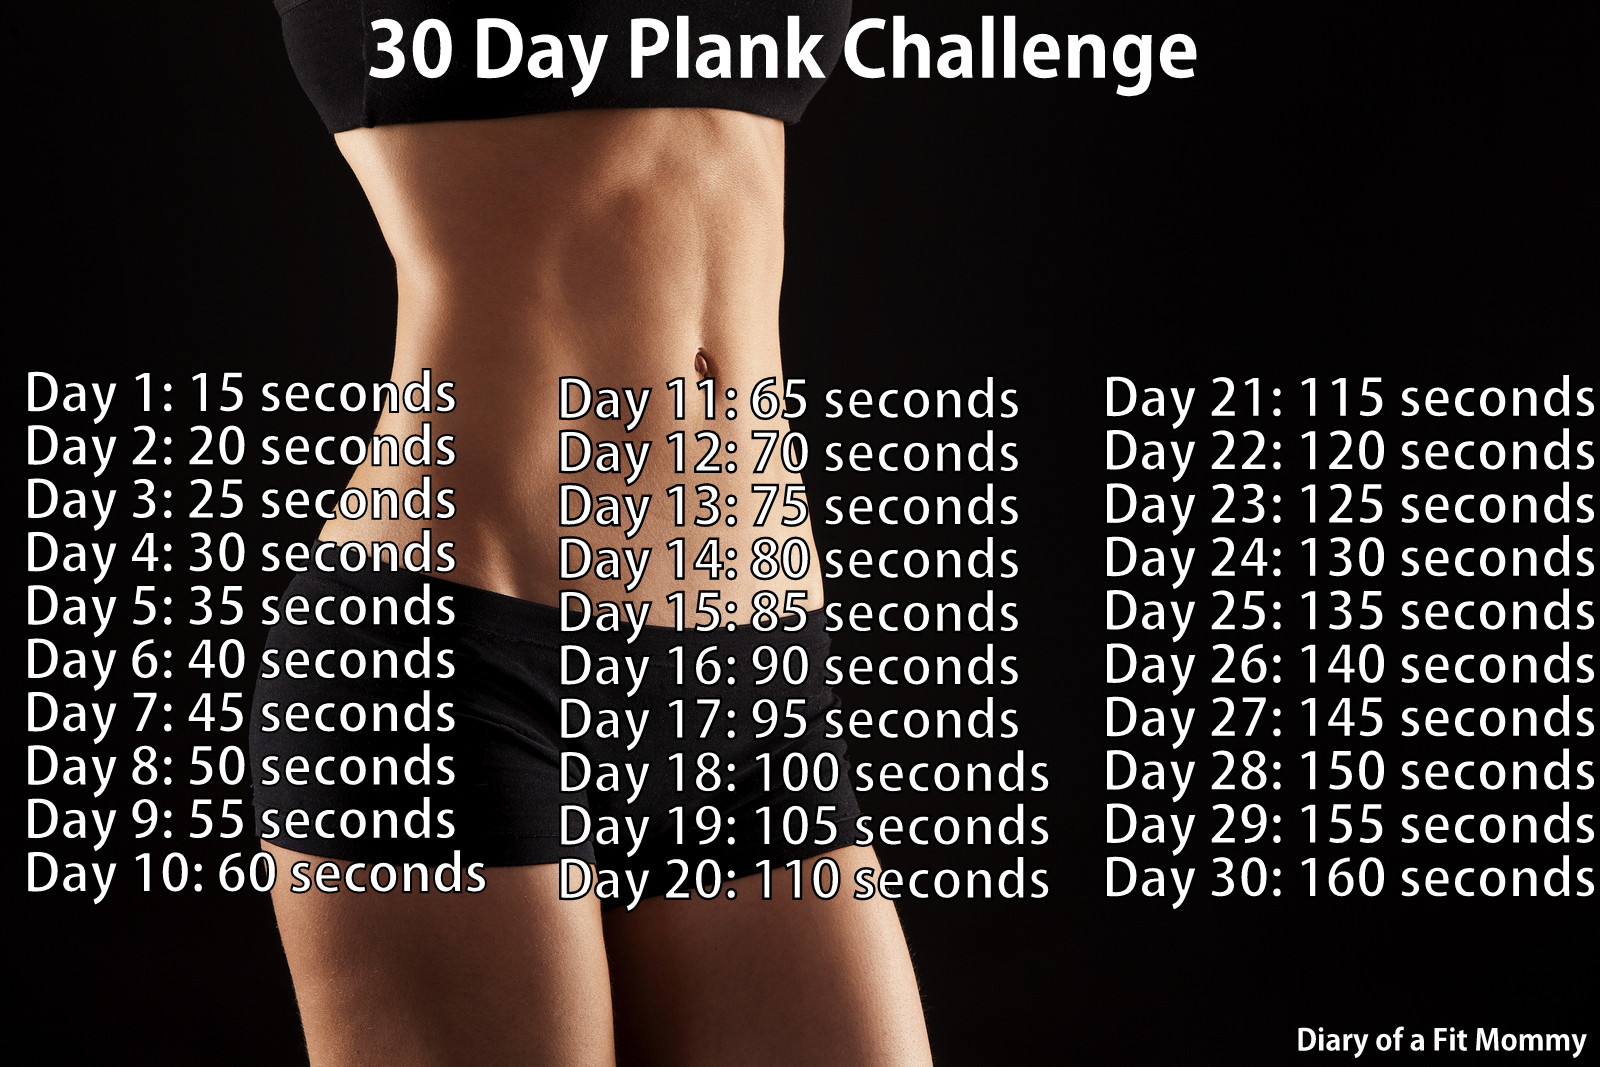 30 day plank challenge before and after pictures